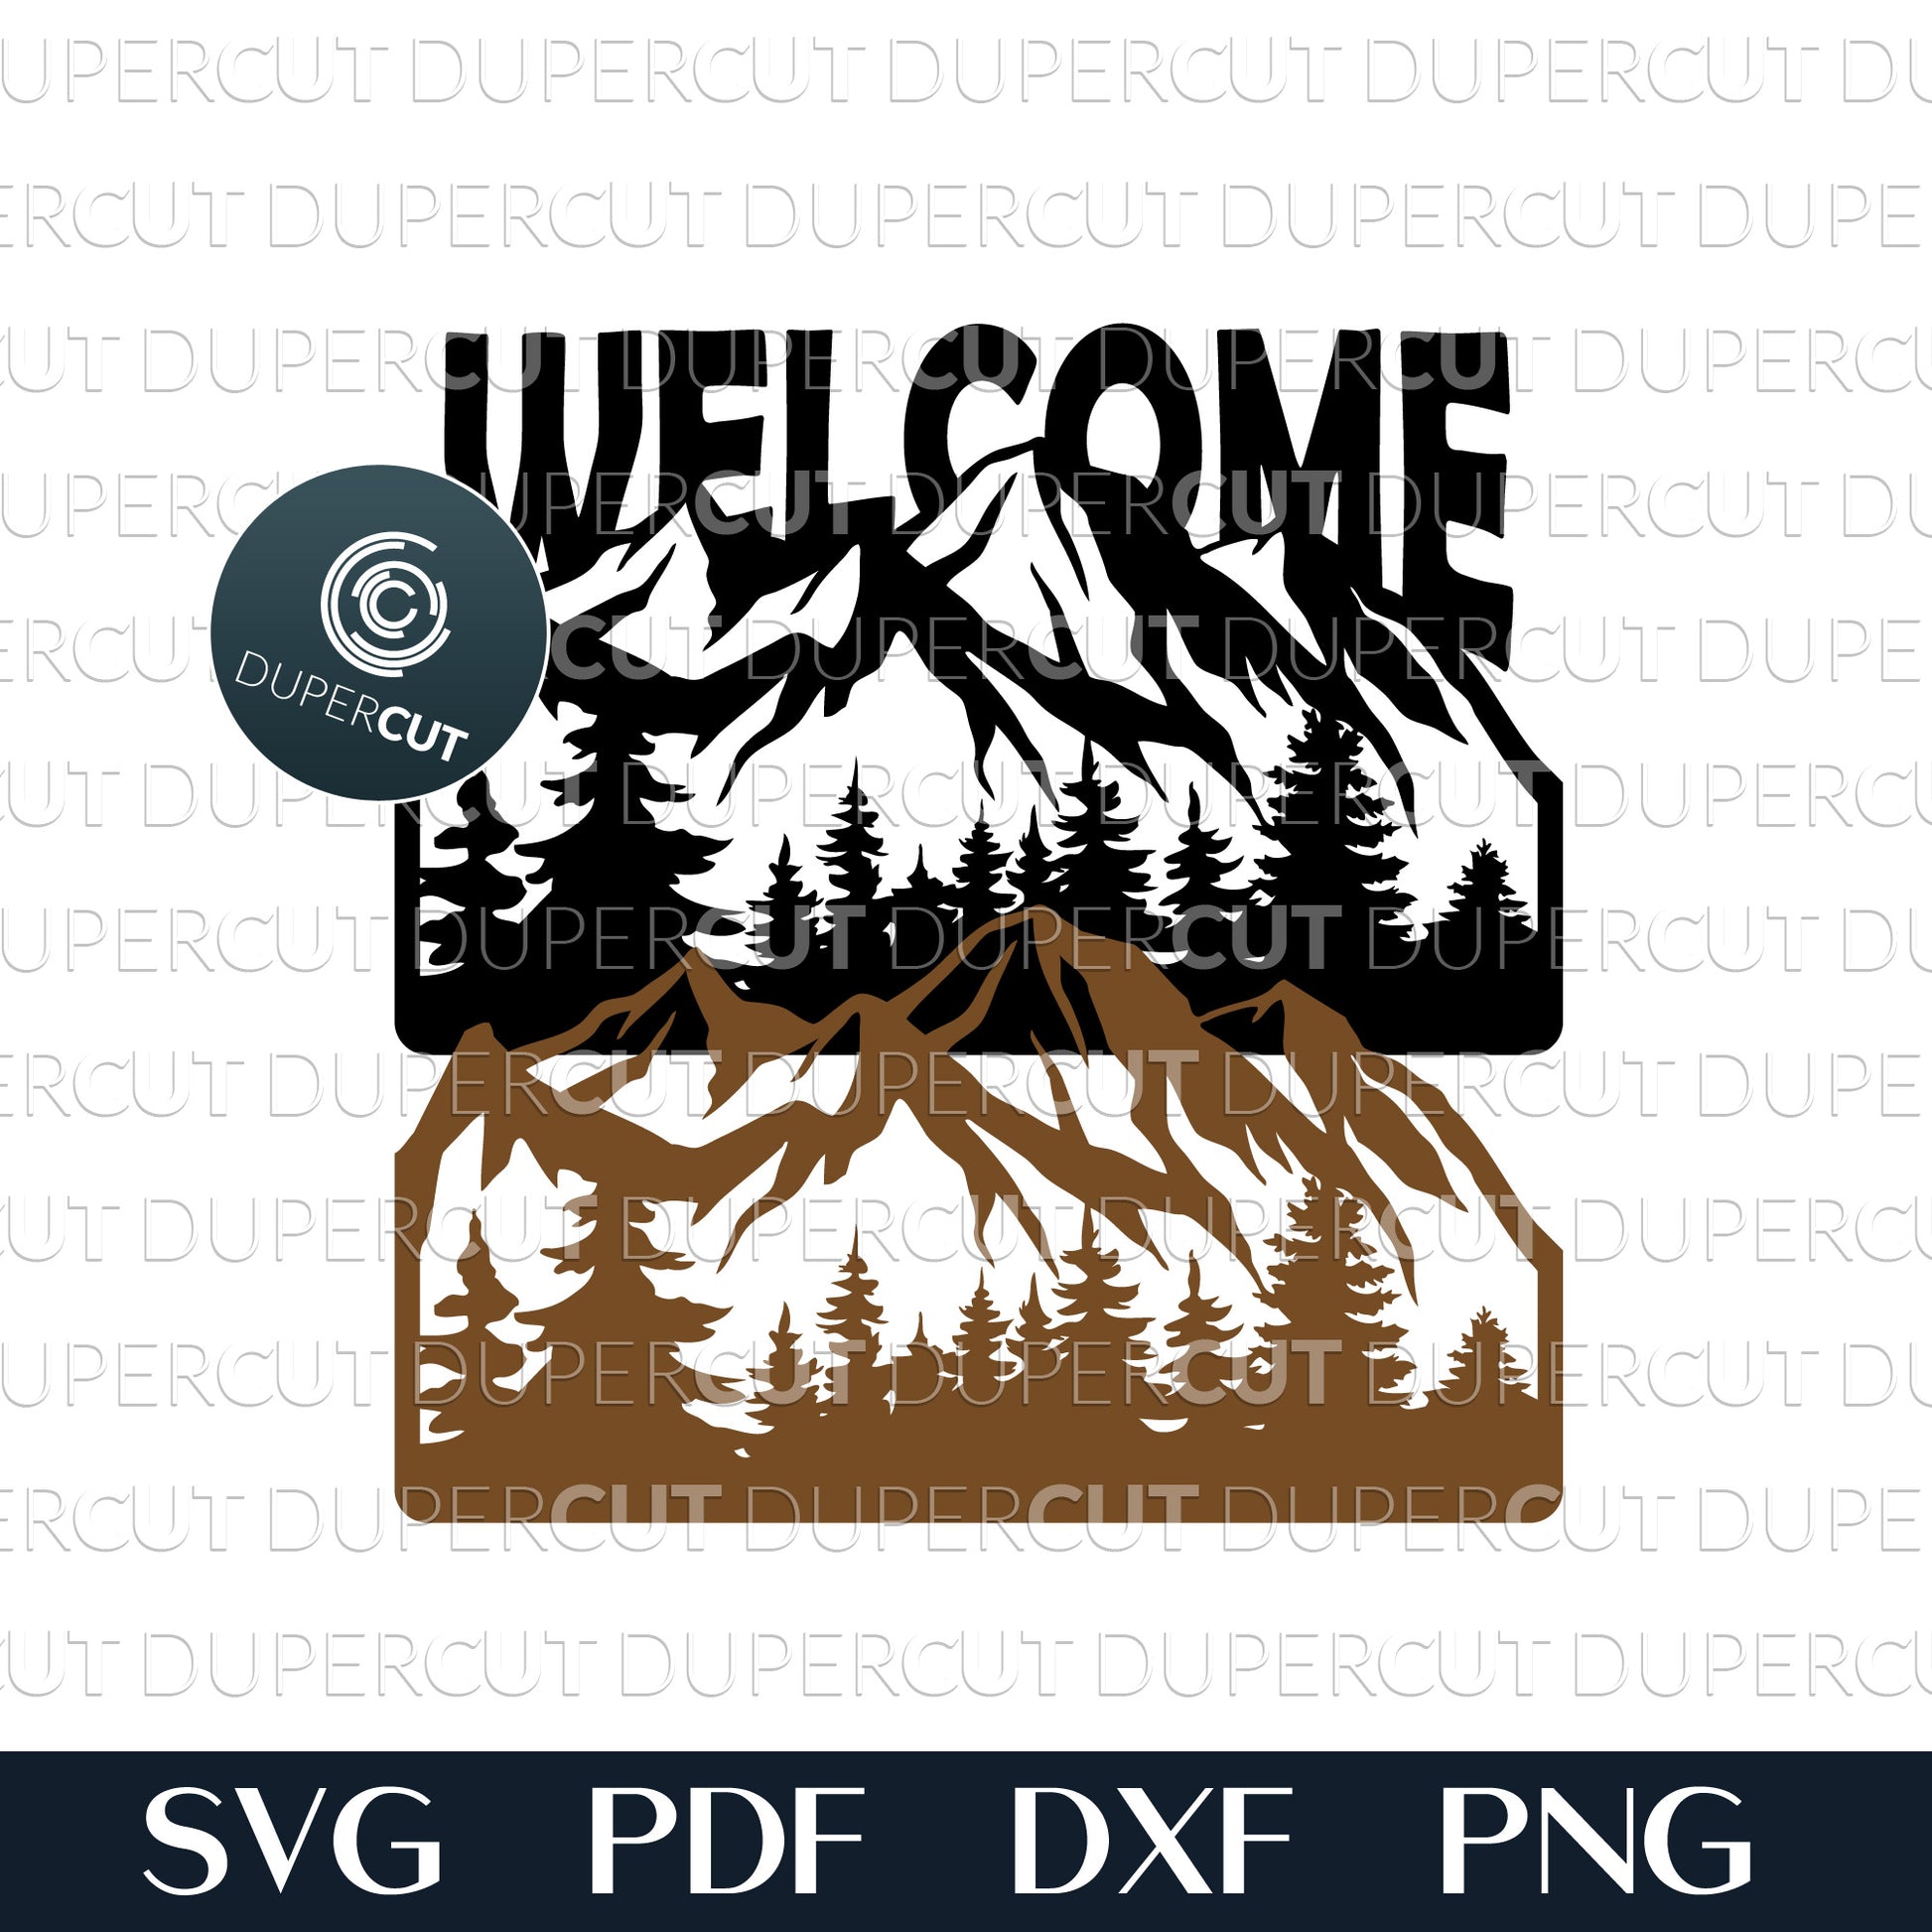 Welcome signs bundle - mountain scene - dual layer laser cutting files - SVG PDF DXF vector designs for Glowforge, Cricut, Silhouette Cameo, CNC plasma machines by DuperCut